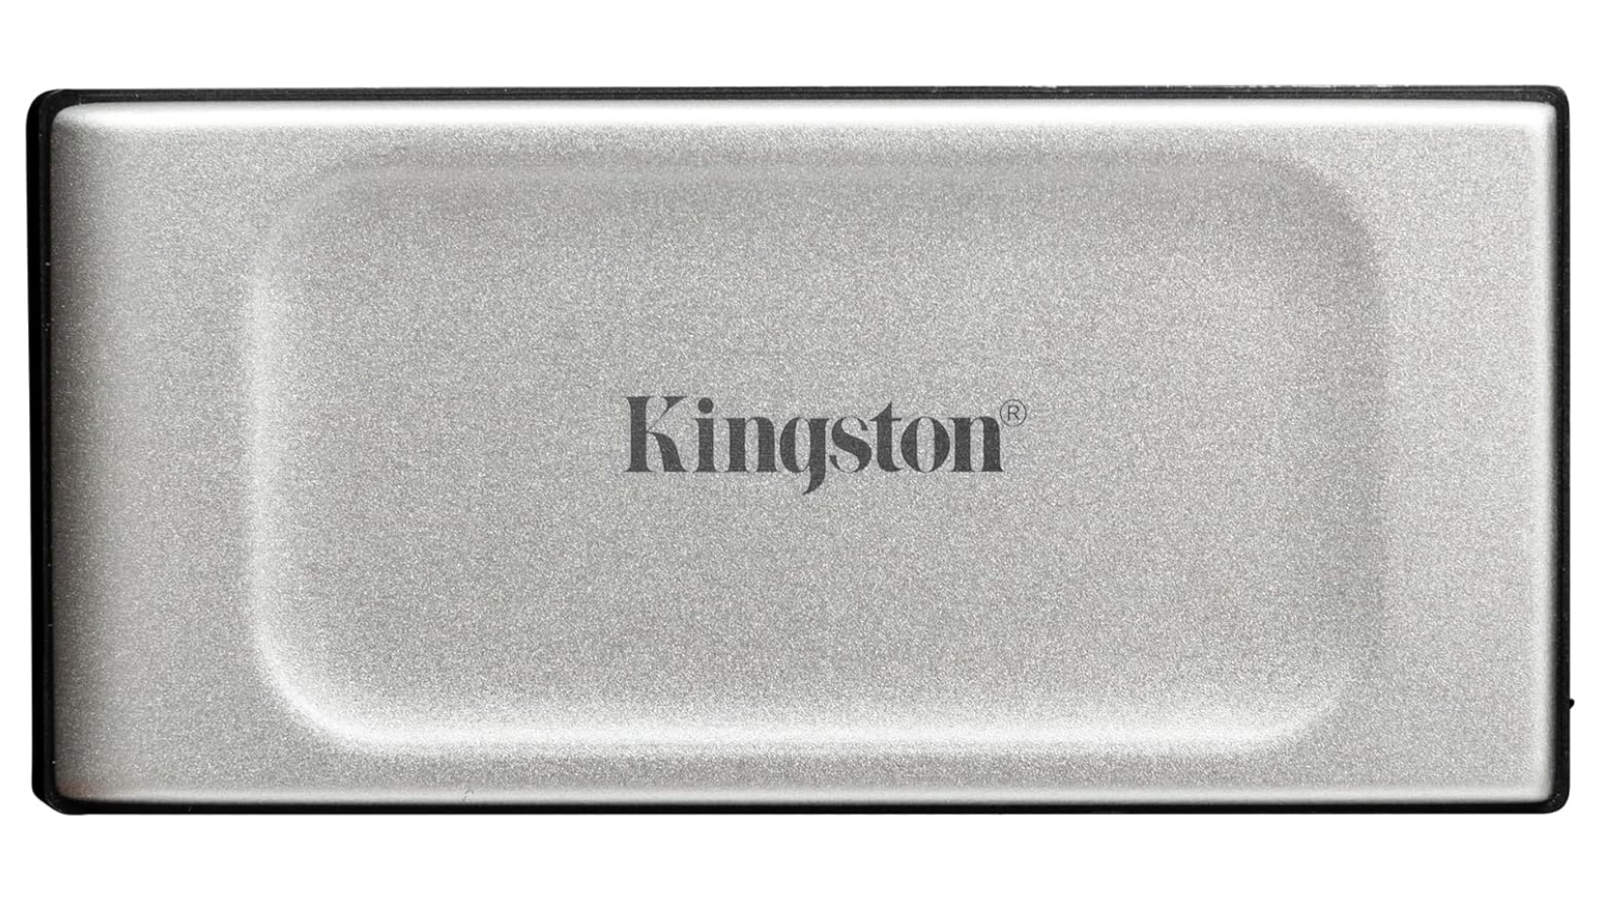 Kingston XS2000 portable SSD against a white background.